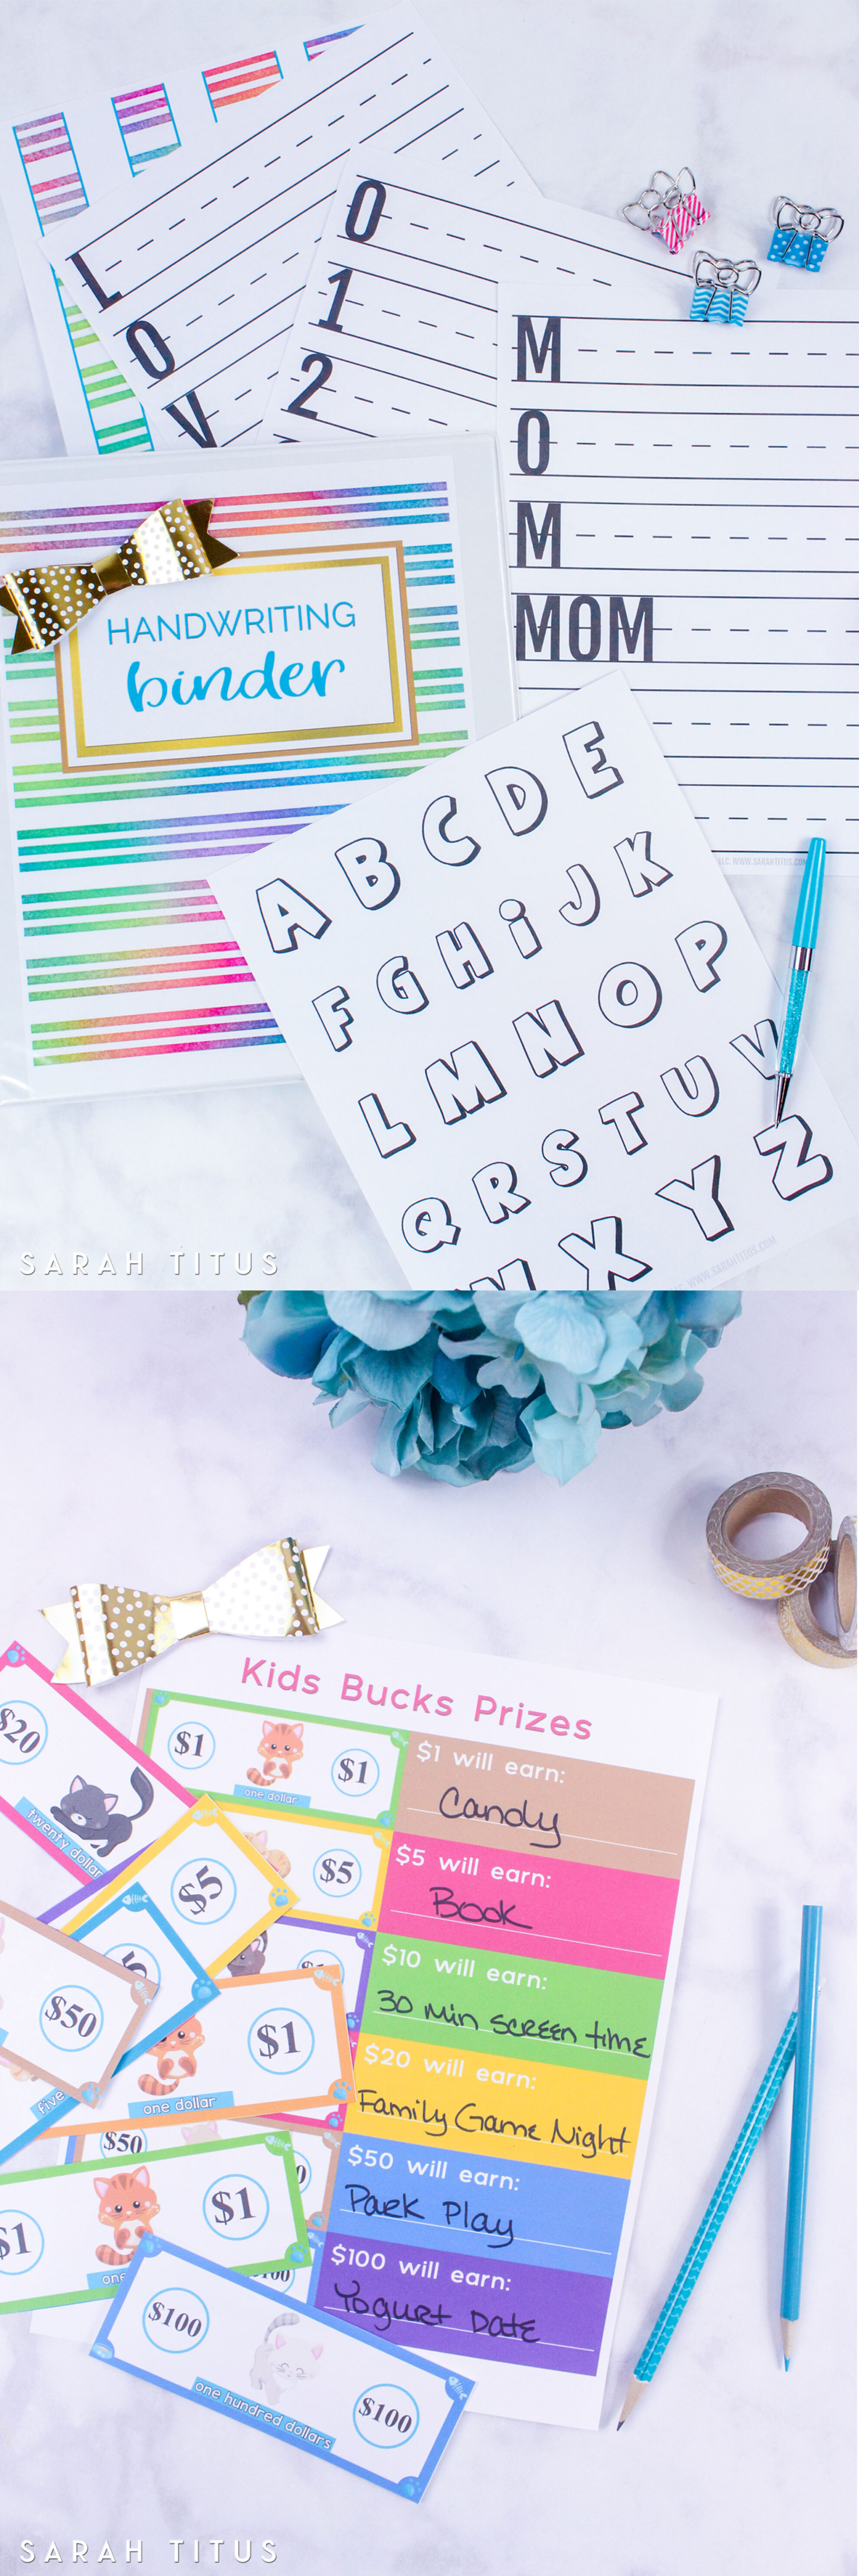 250+ page Handwriting Binder printables set includes, capital letters, lowercase letters, numbers, coloring pages, Kids Bucks rewards system...and more!